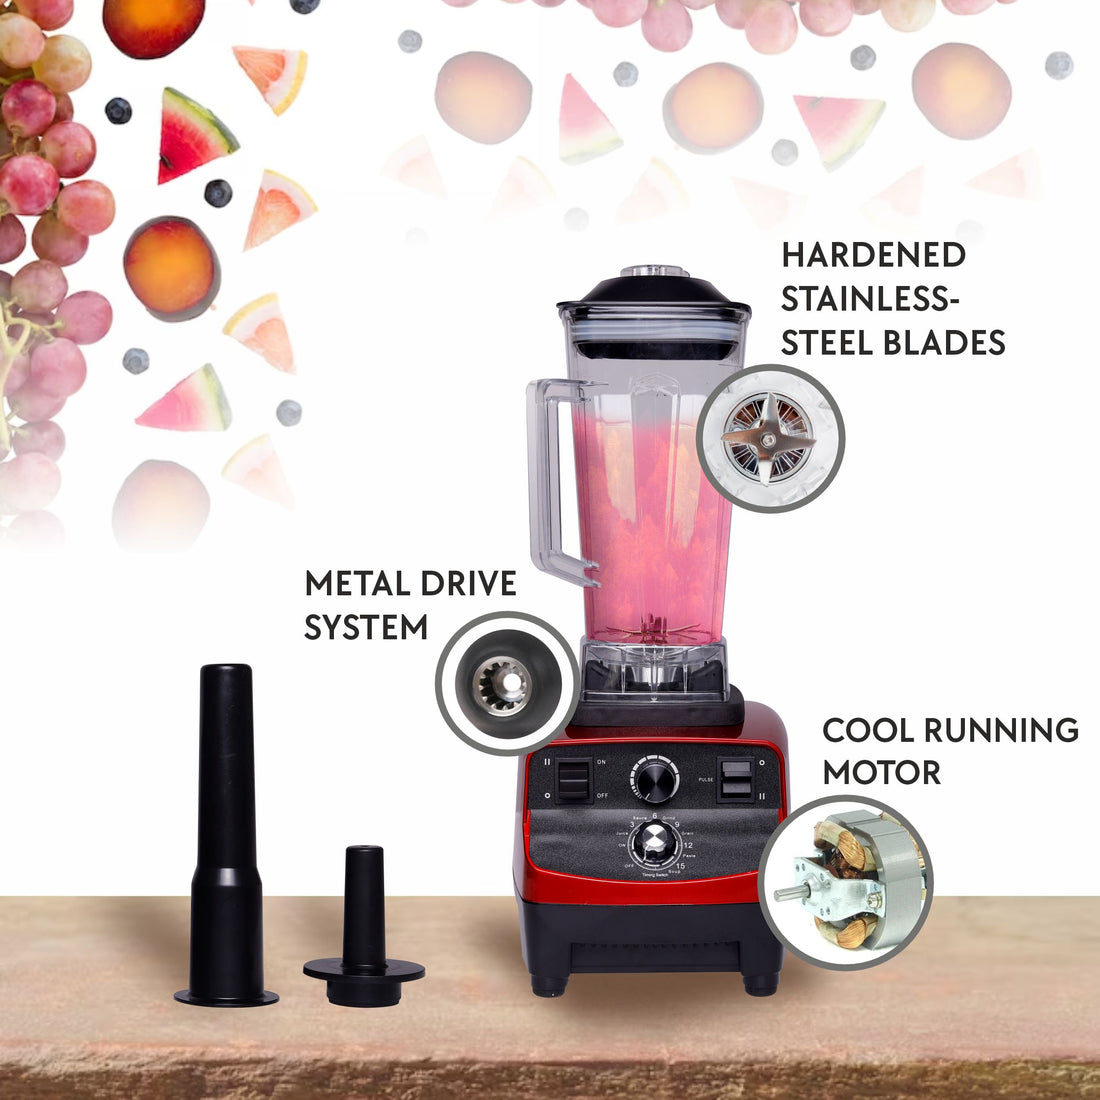 HAVAI Professional Heavy Duty Blender/Grinder/Mixer, 1200W, 2 Litres BPA Free Jar, Crush Ice - Make Shakes, Grind Spices and Smoothies (RED)